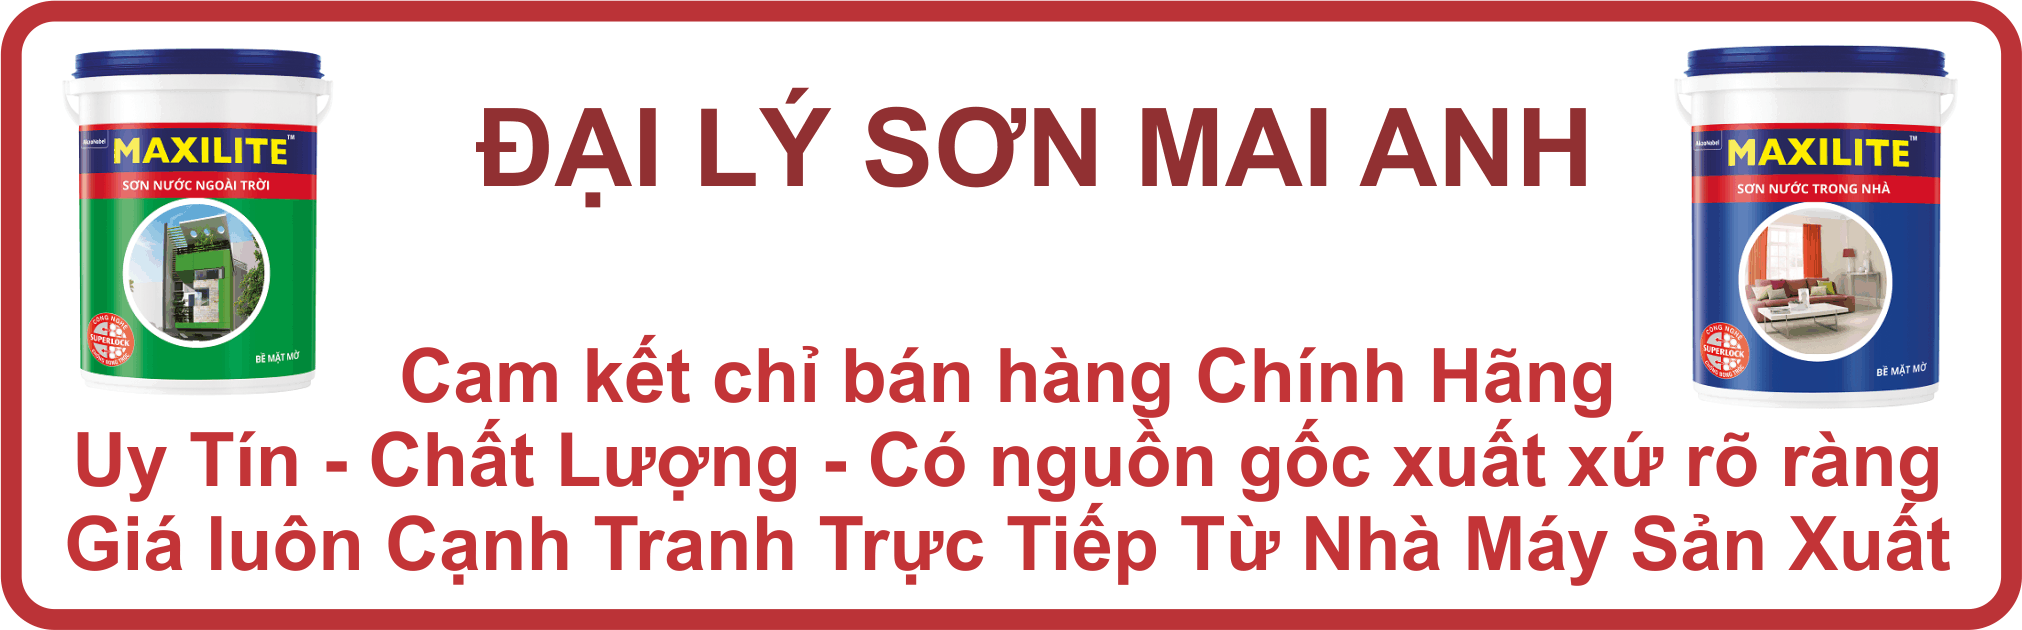 son-mai-anh-cam-ket-chat-luong-maxilite